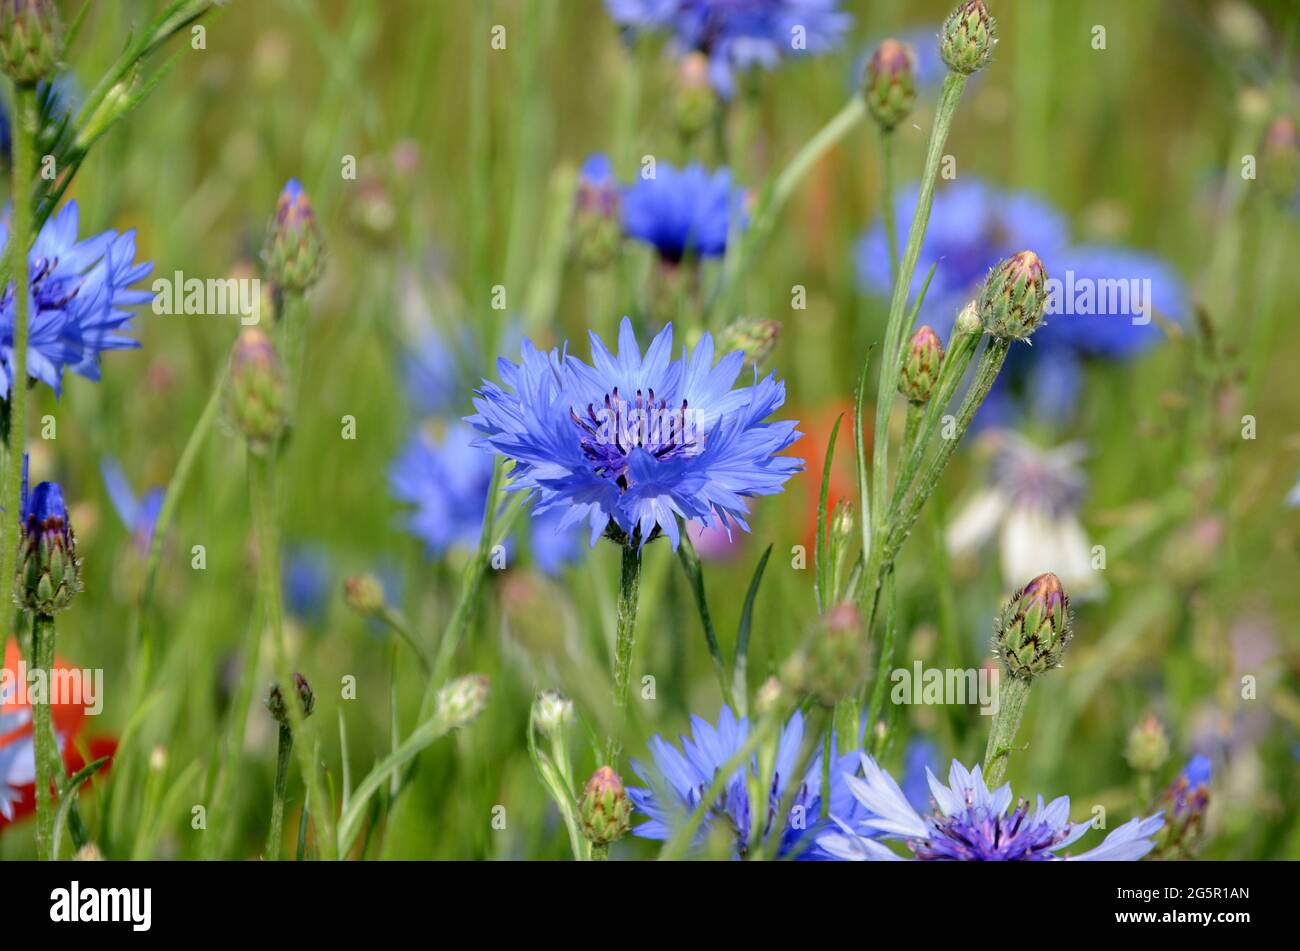 View into a field with flowers sn several colors, but with focus on a blue cornflower Stock Photo